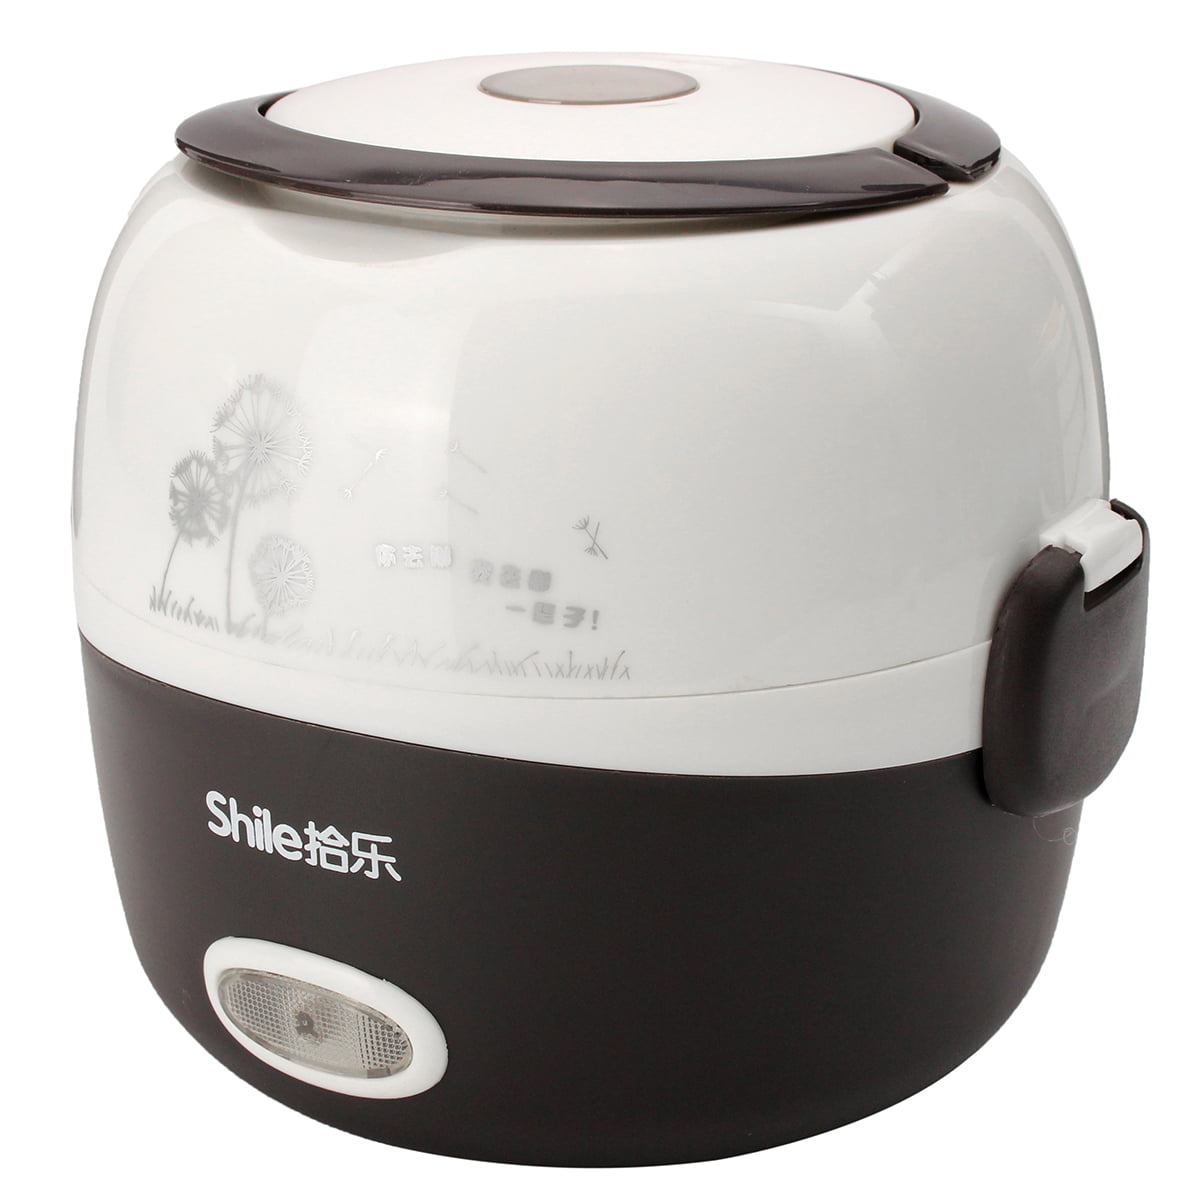 1.3L Electric Portable Lunch Box Rice Cooker Steamer 2 Layer Stainless Steel ~